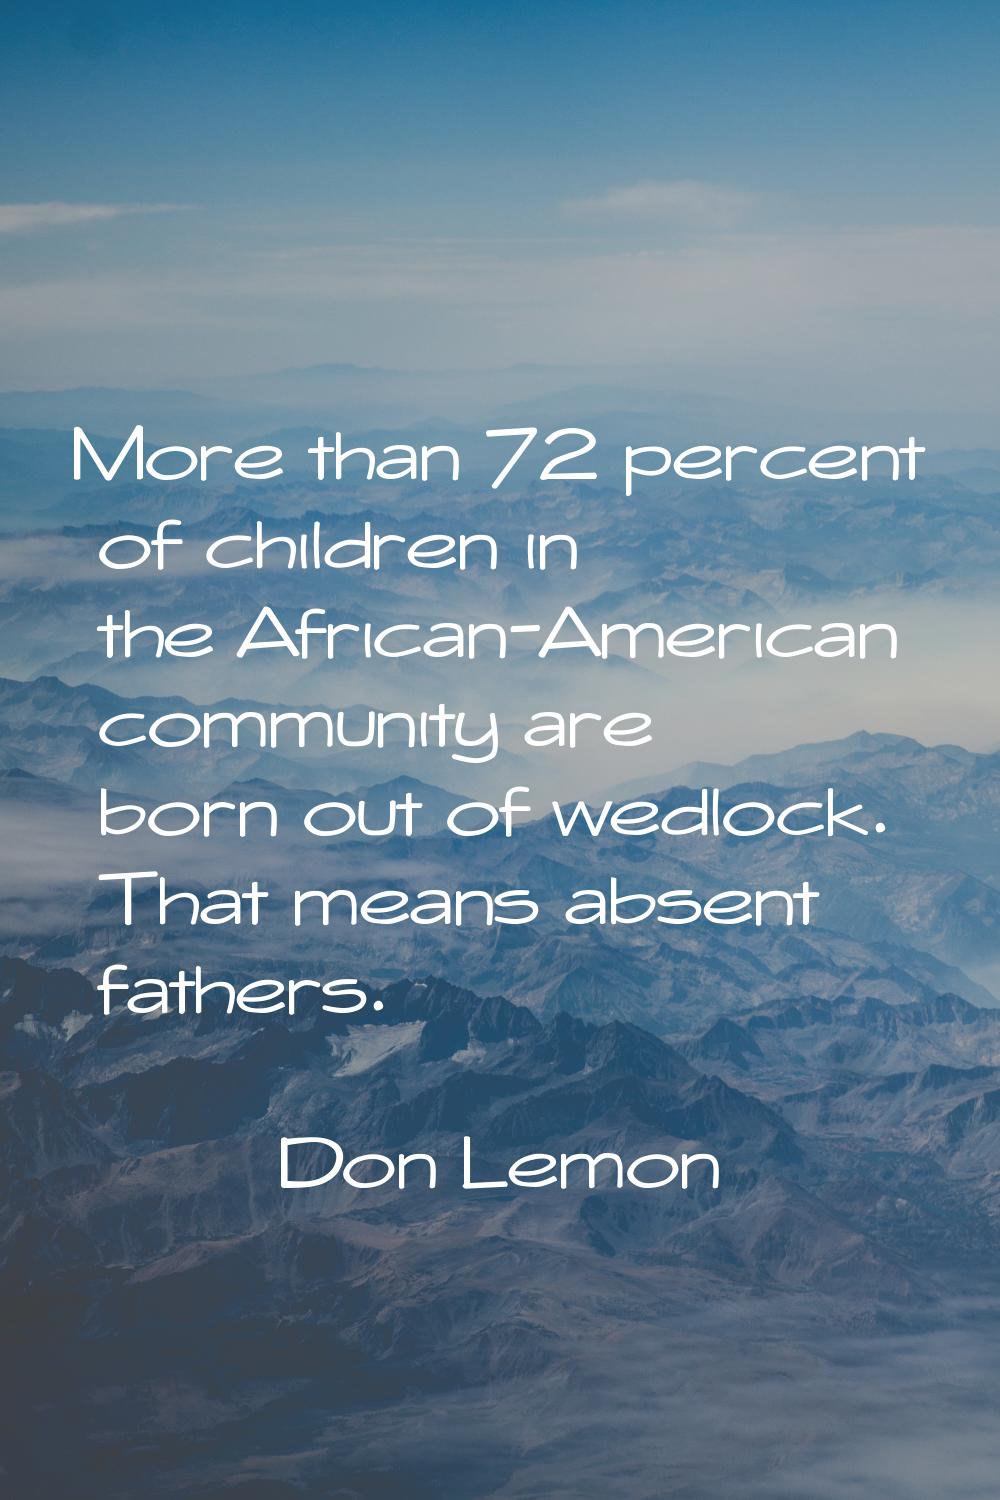 More than 72 percent of children in the African-American community are born out of wedlock. That me